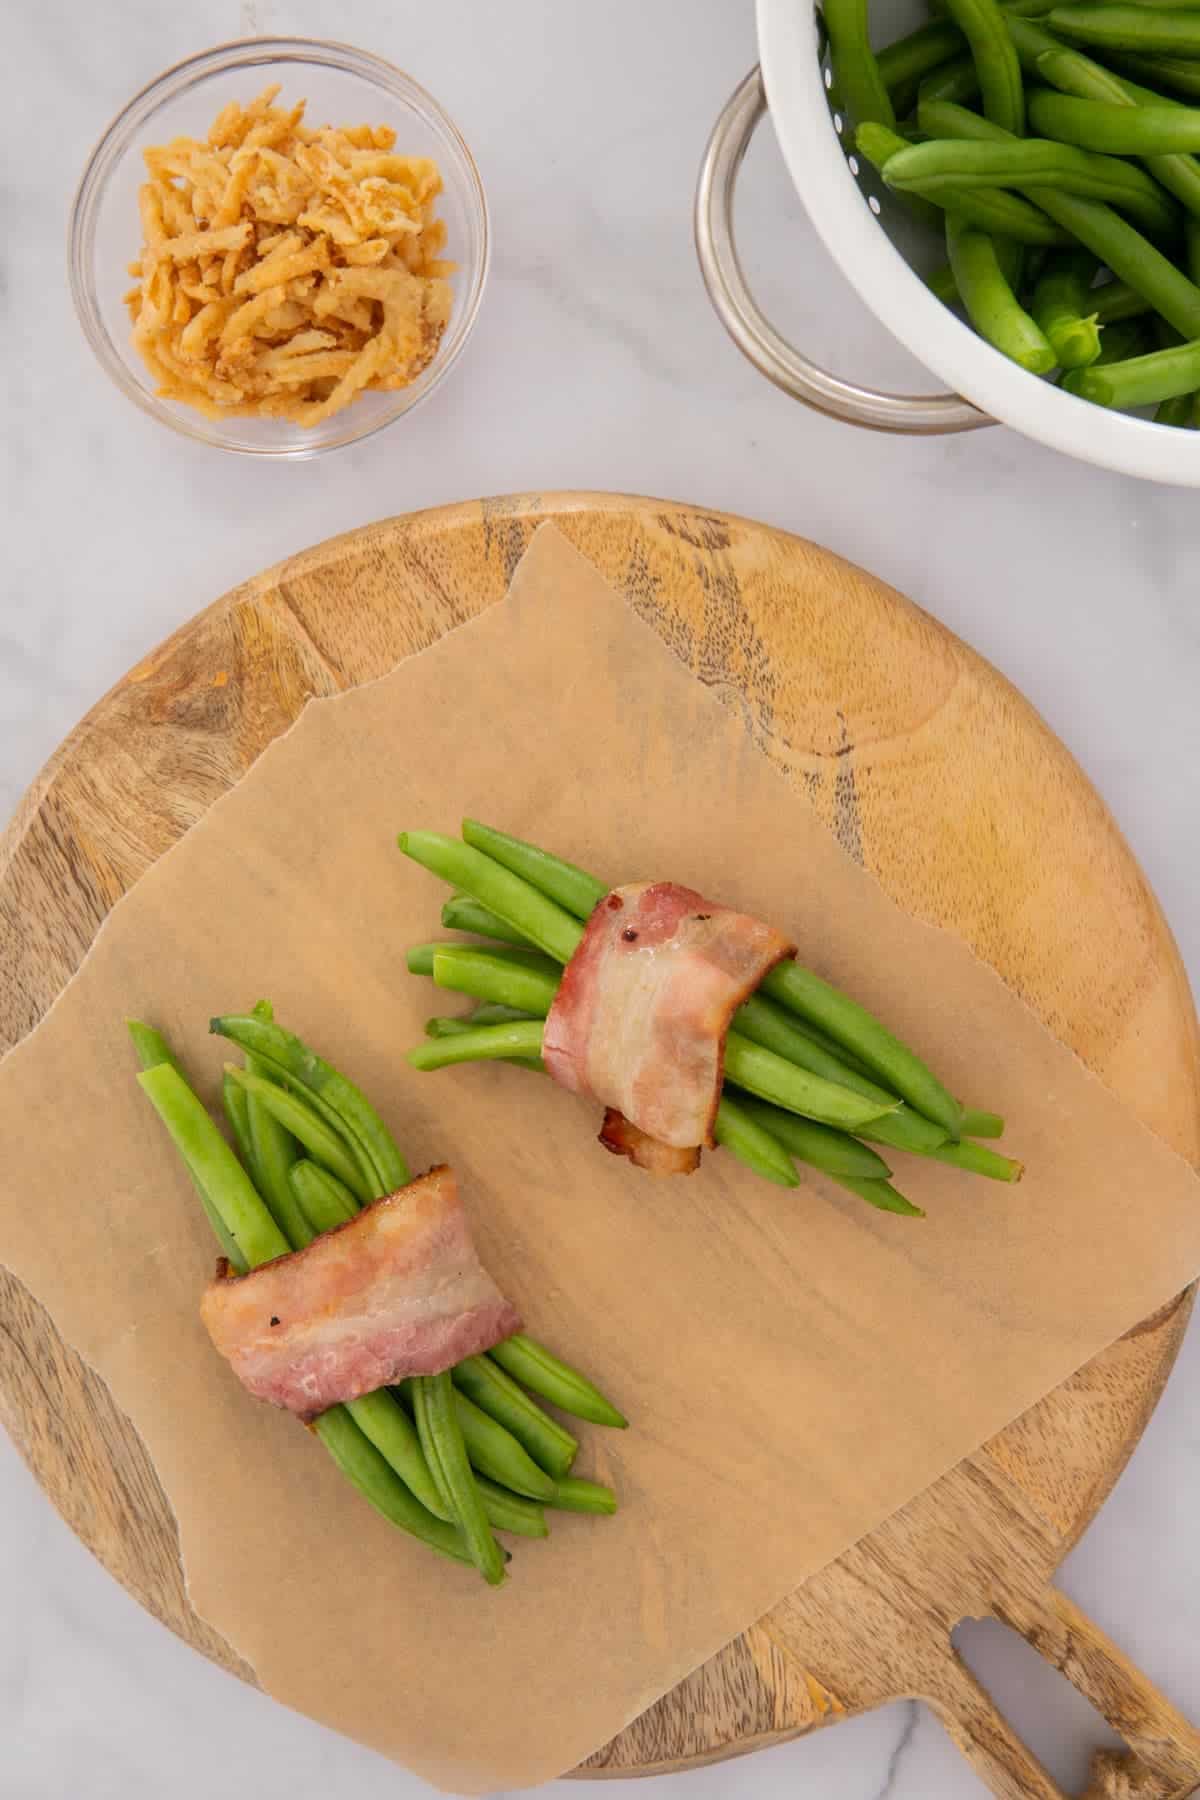 Green beans wrapped in bacon on a wooden board.